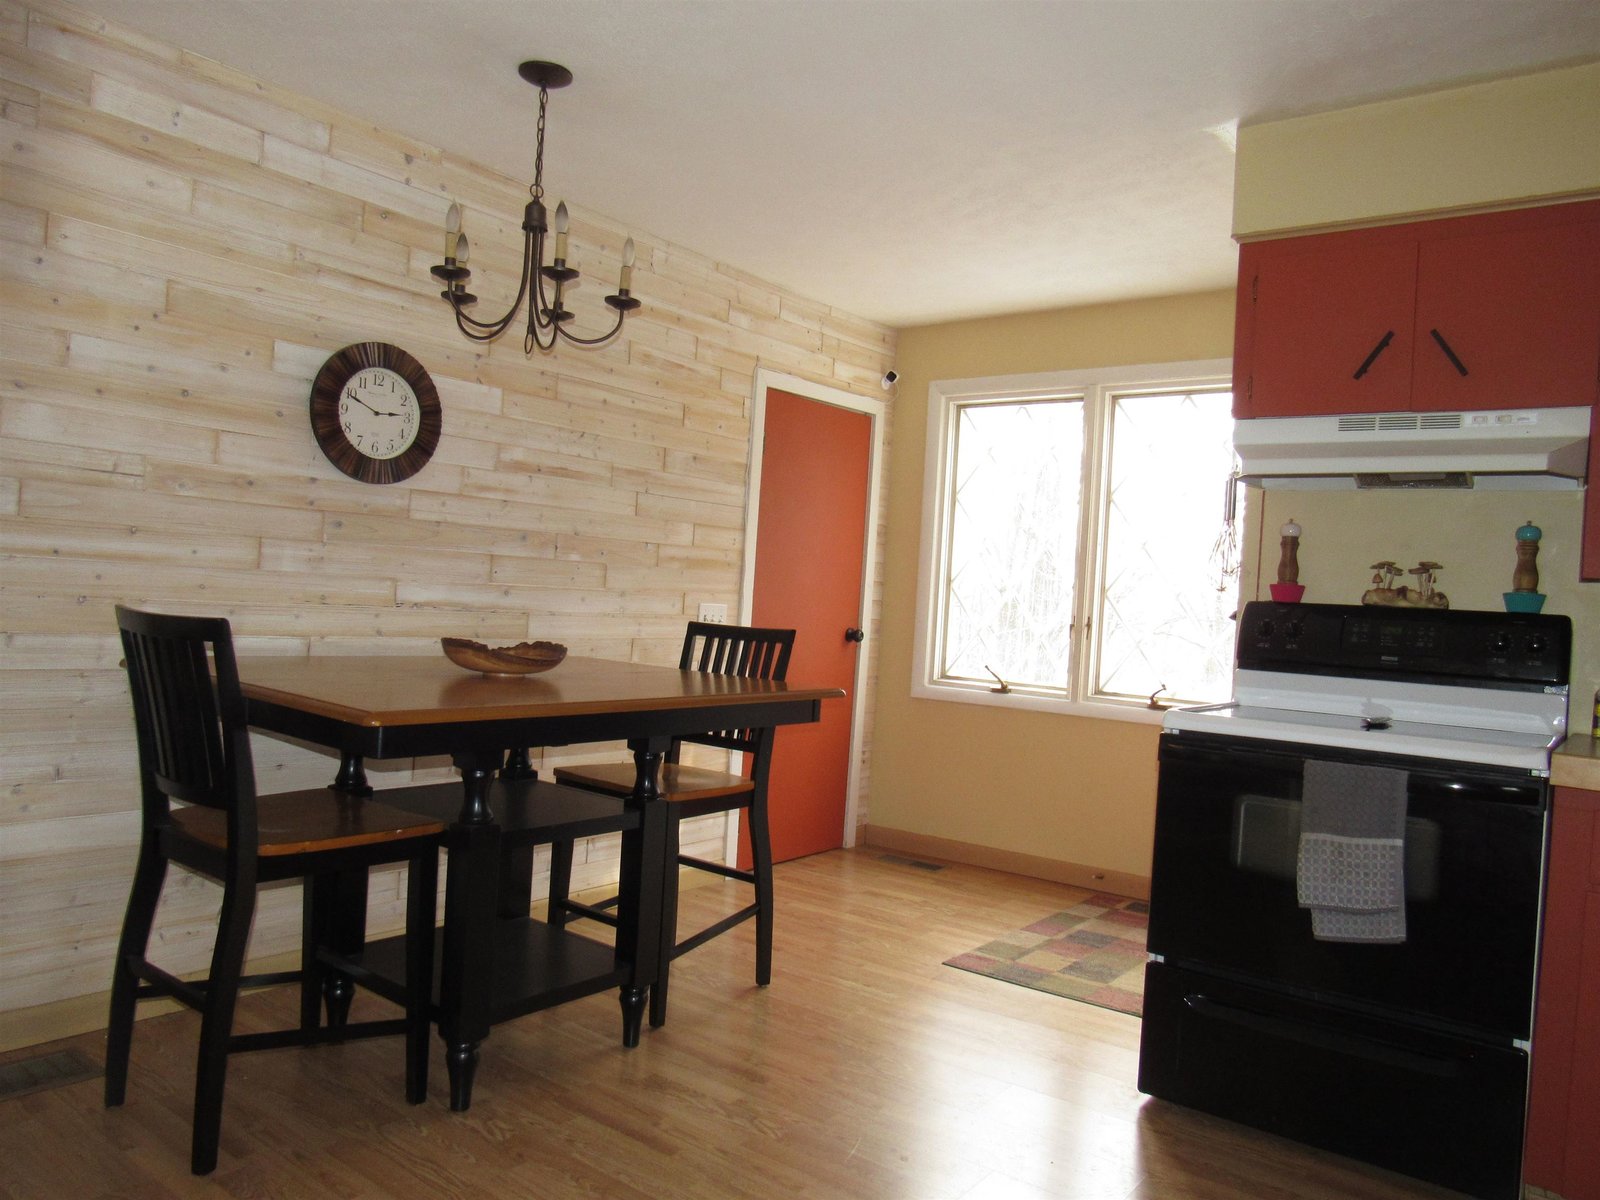 Eat-in kitchen or dining area